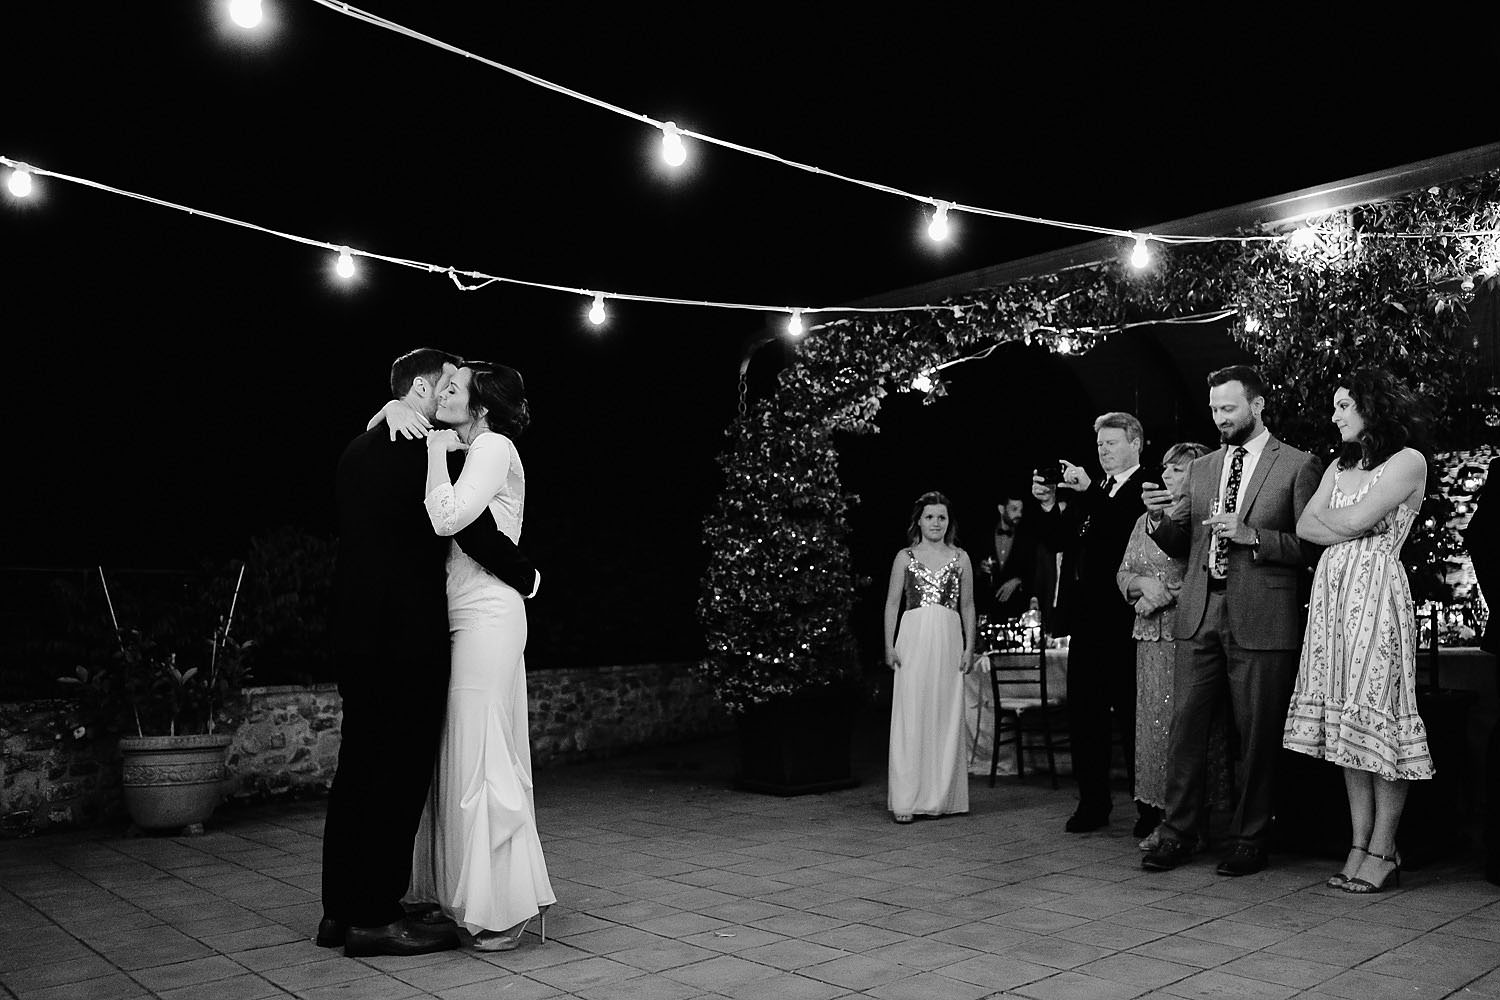 relaxing countryside wedding in tuscany bride groom first dance